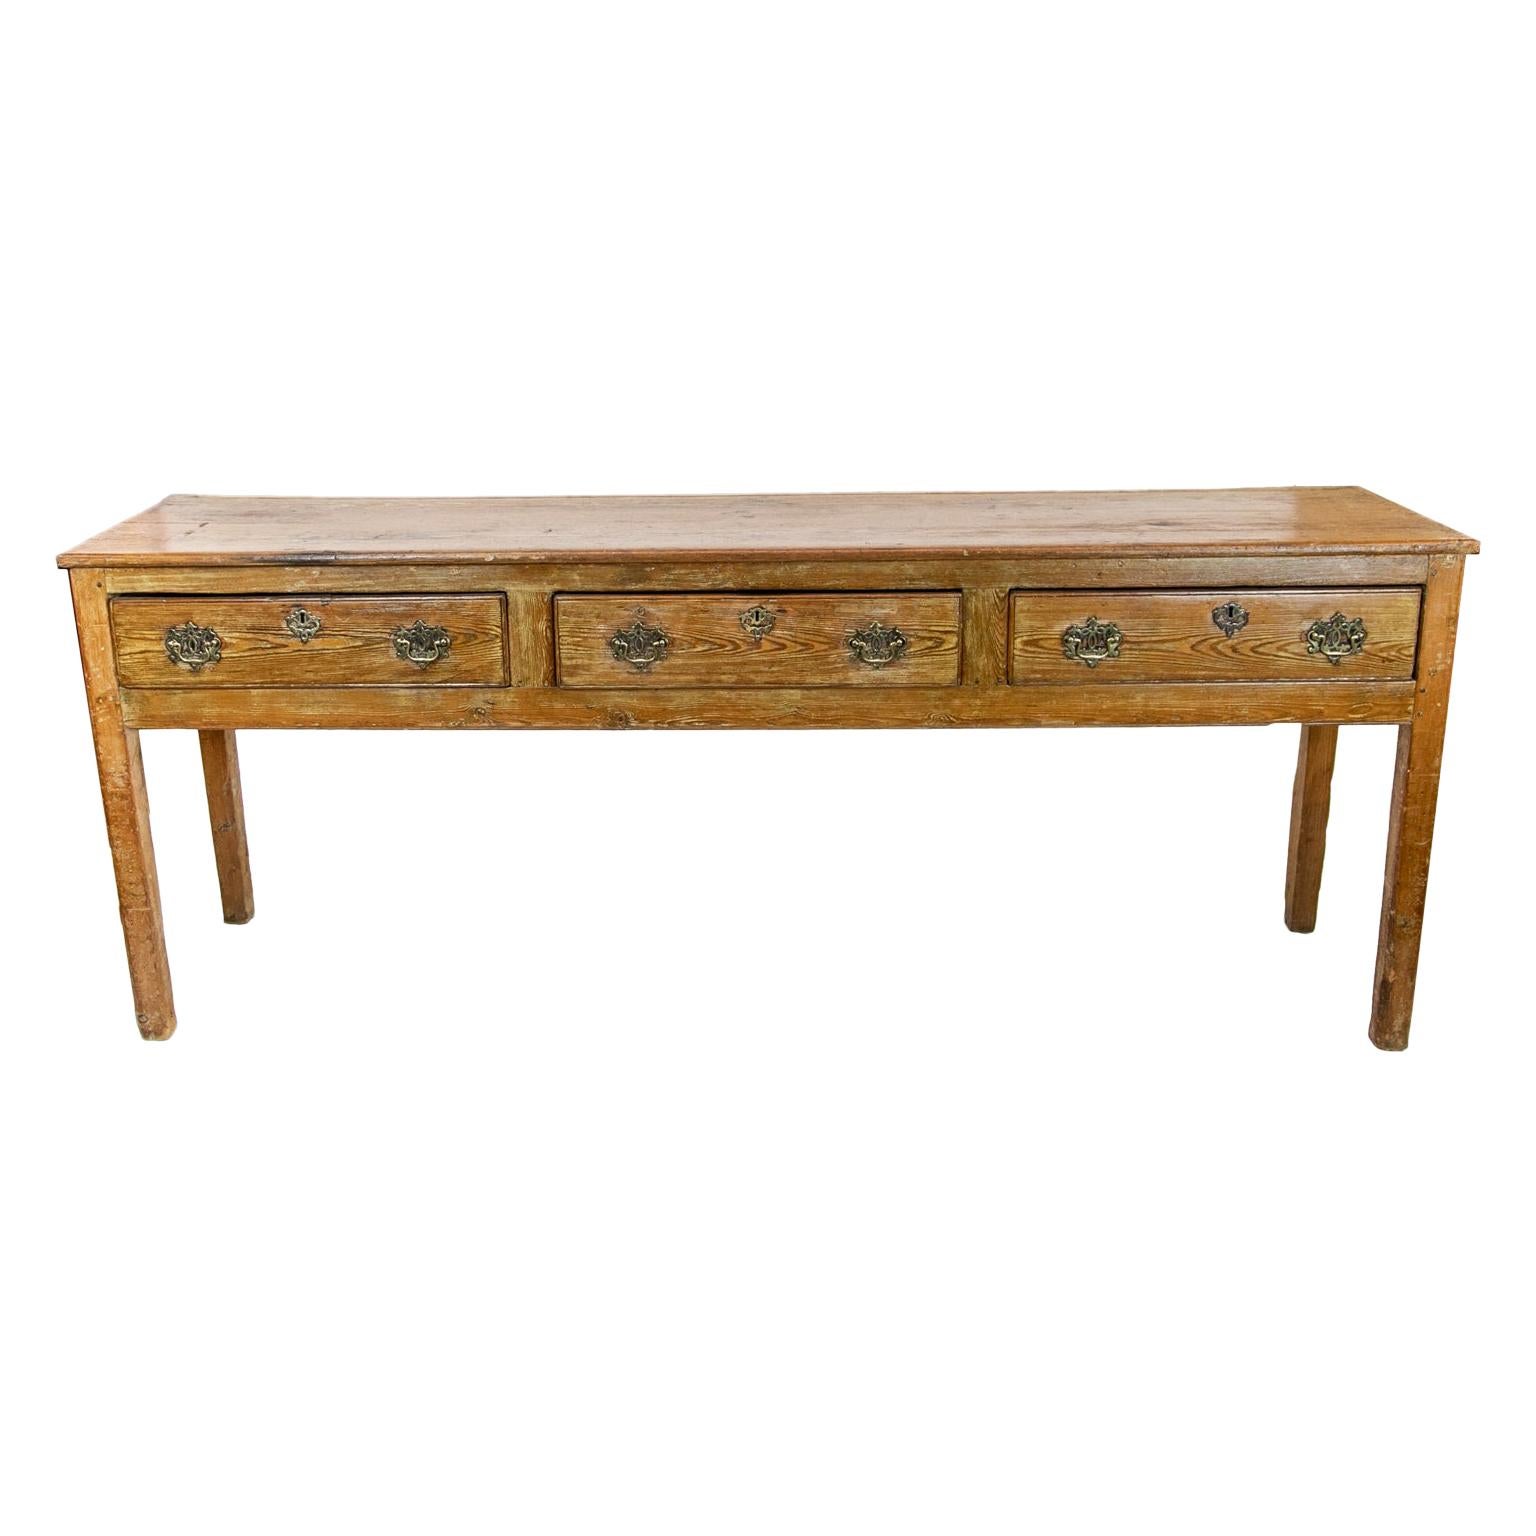 19th Century English Pine Sideboard For Sale